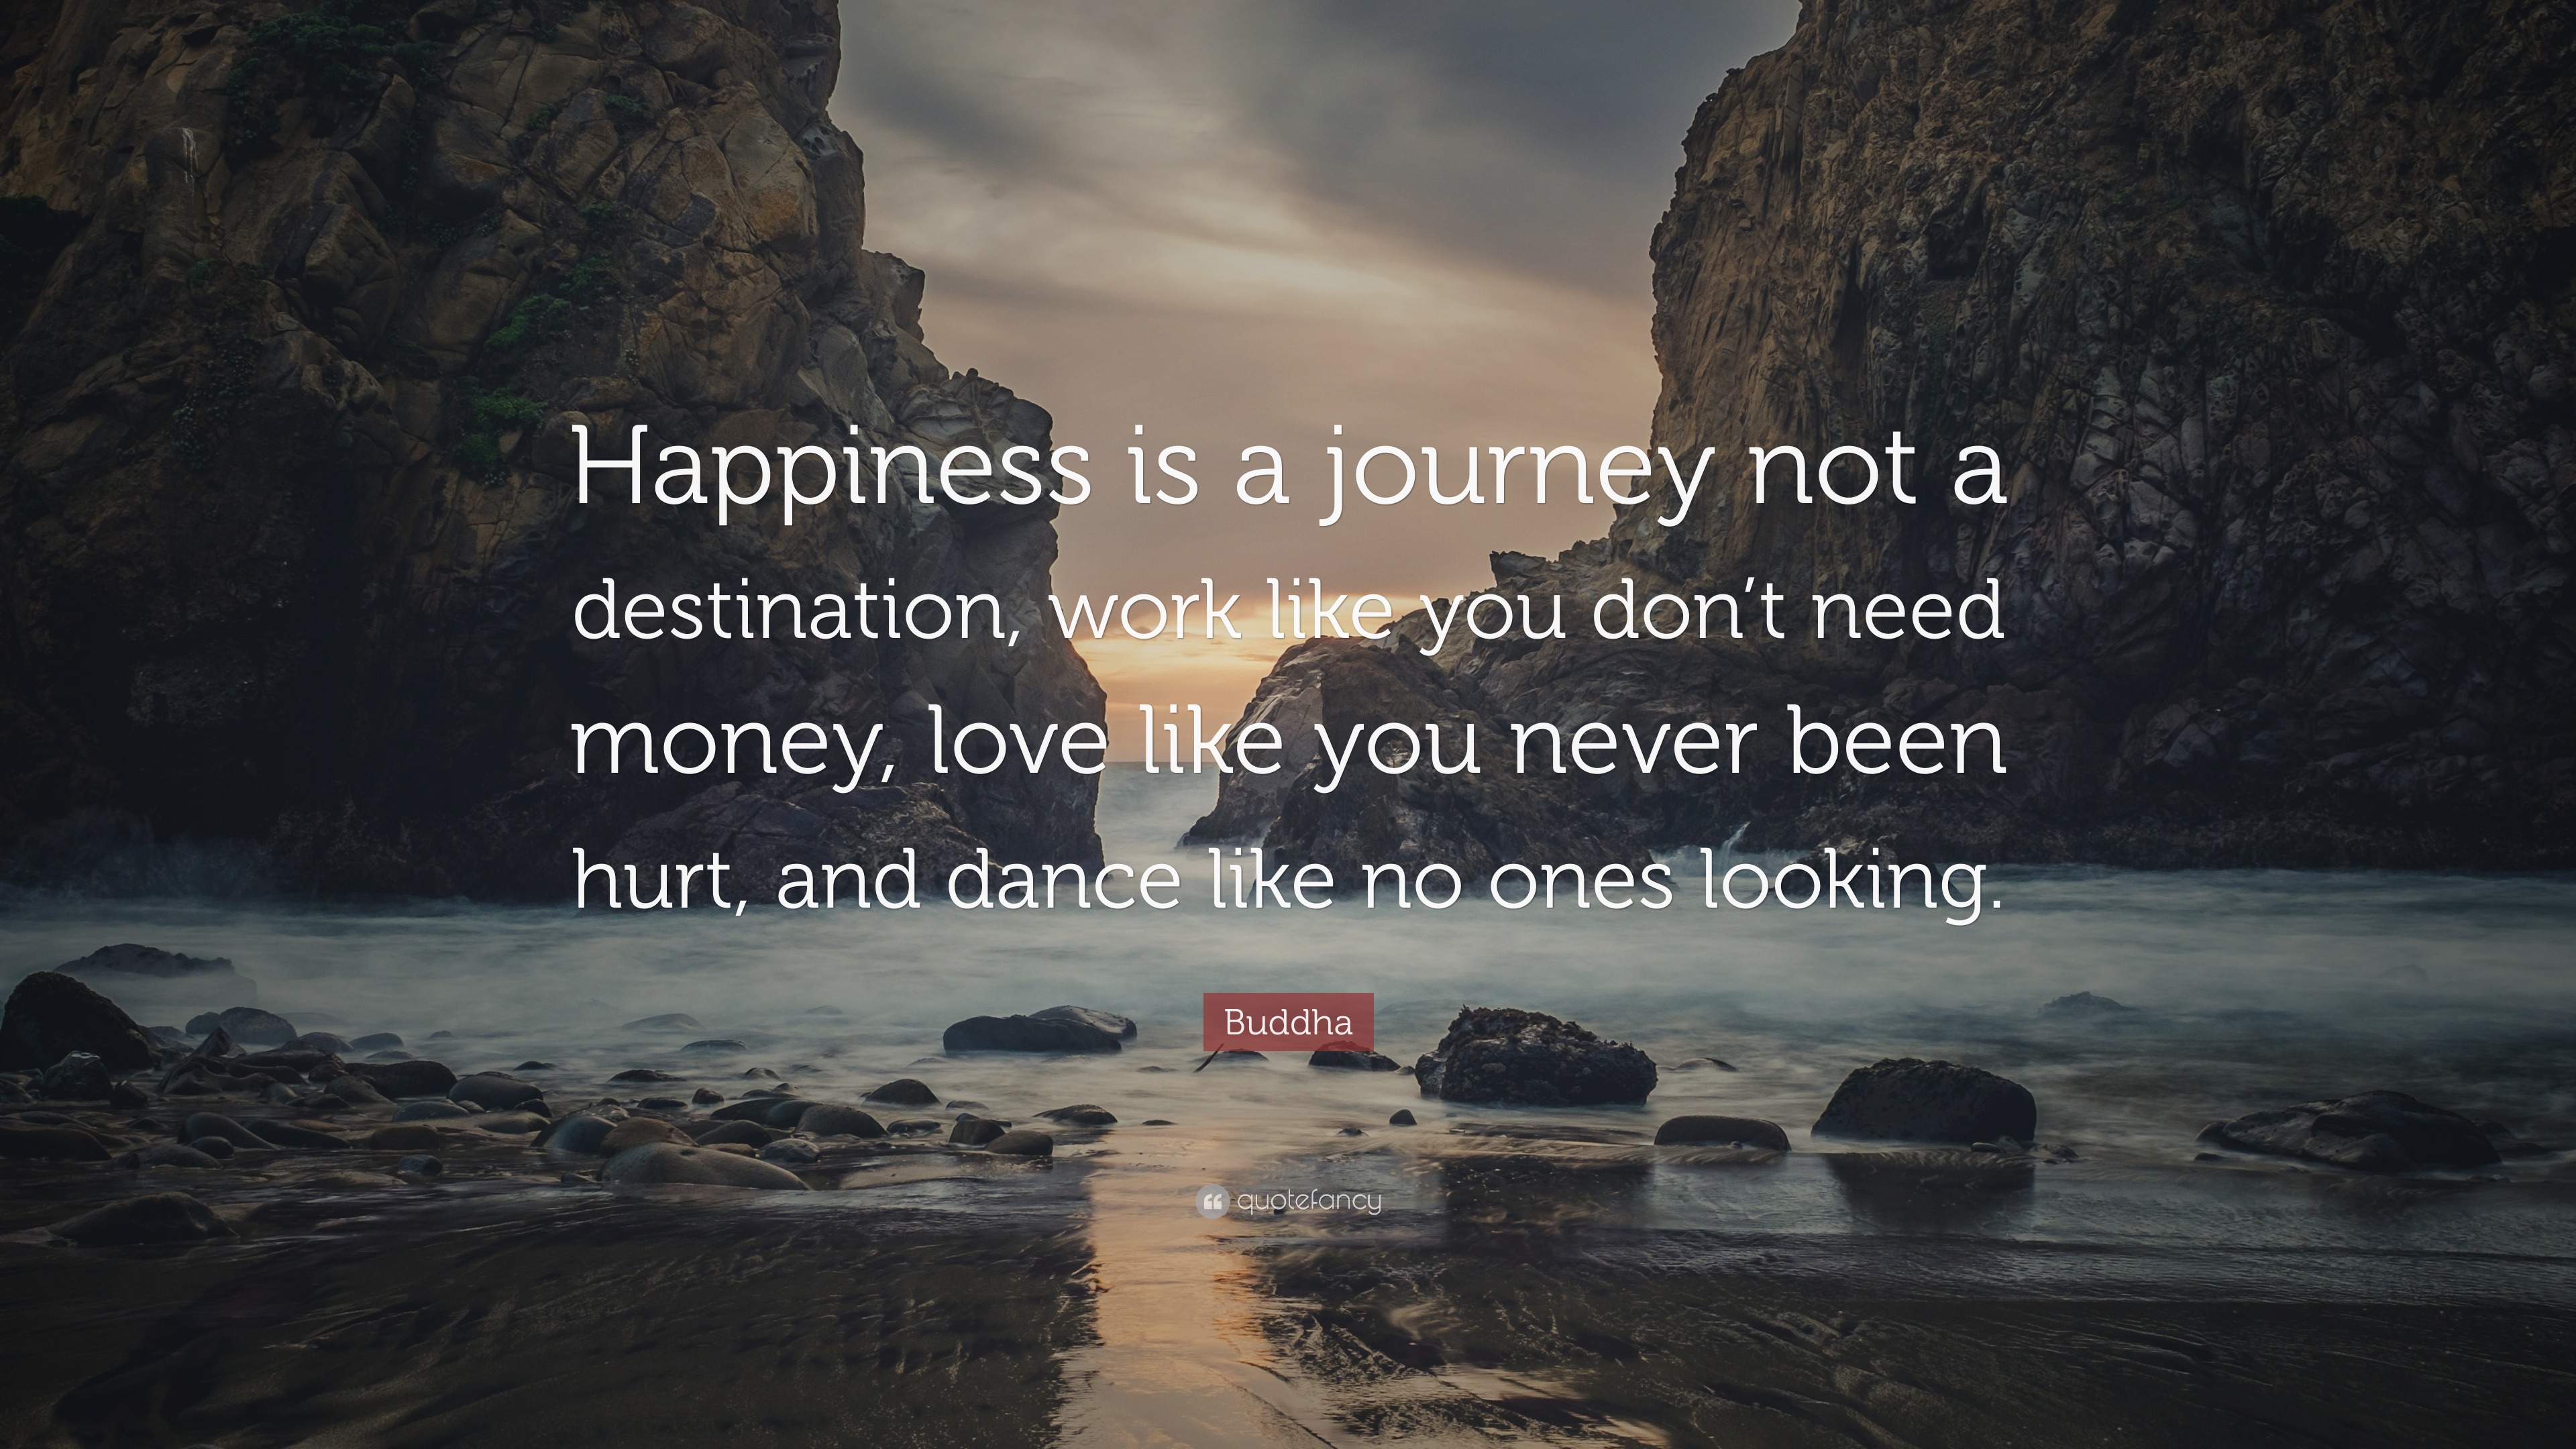 4702500 Buddha Quote Happiness is a journey not a destination work like